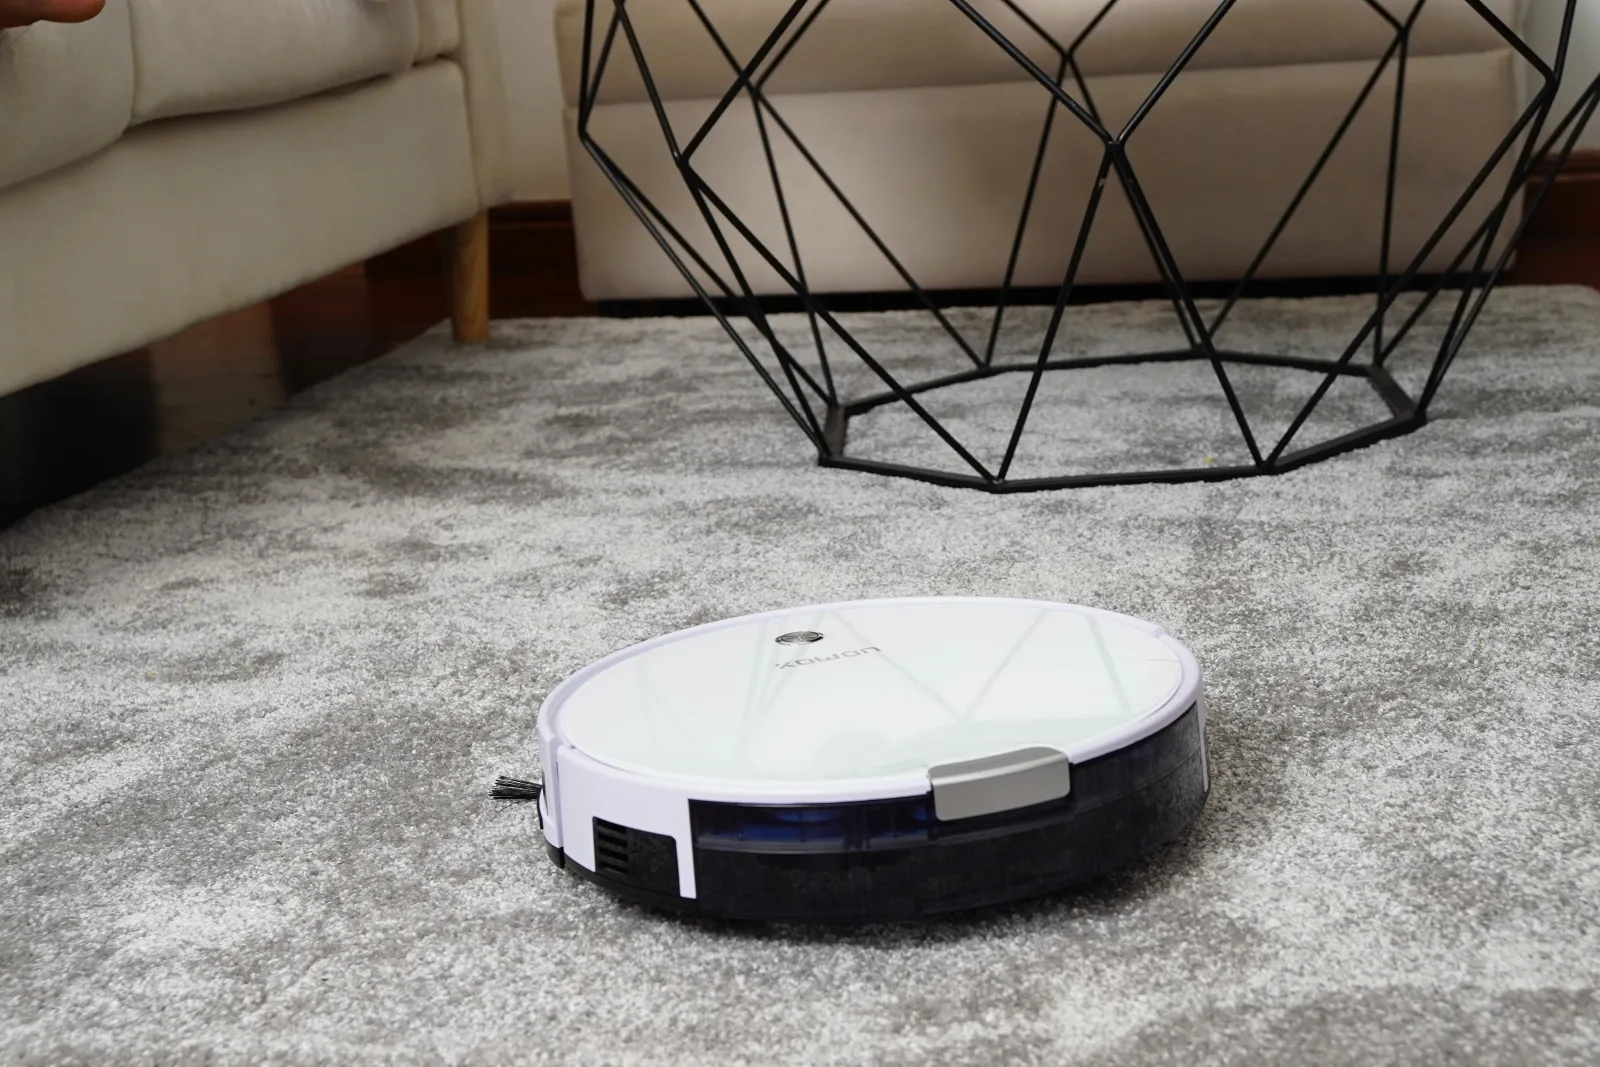 white robot vacuum being loud as it cleans a carpeted living area